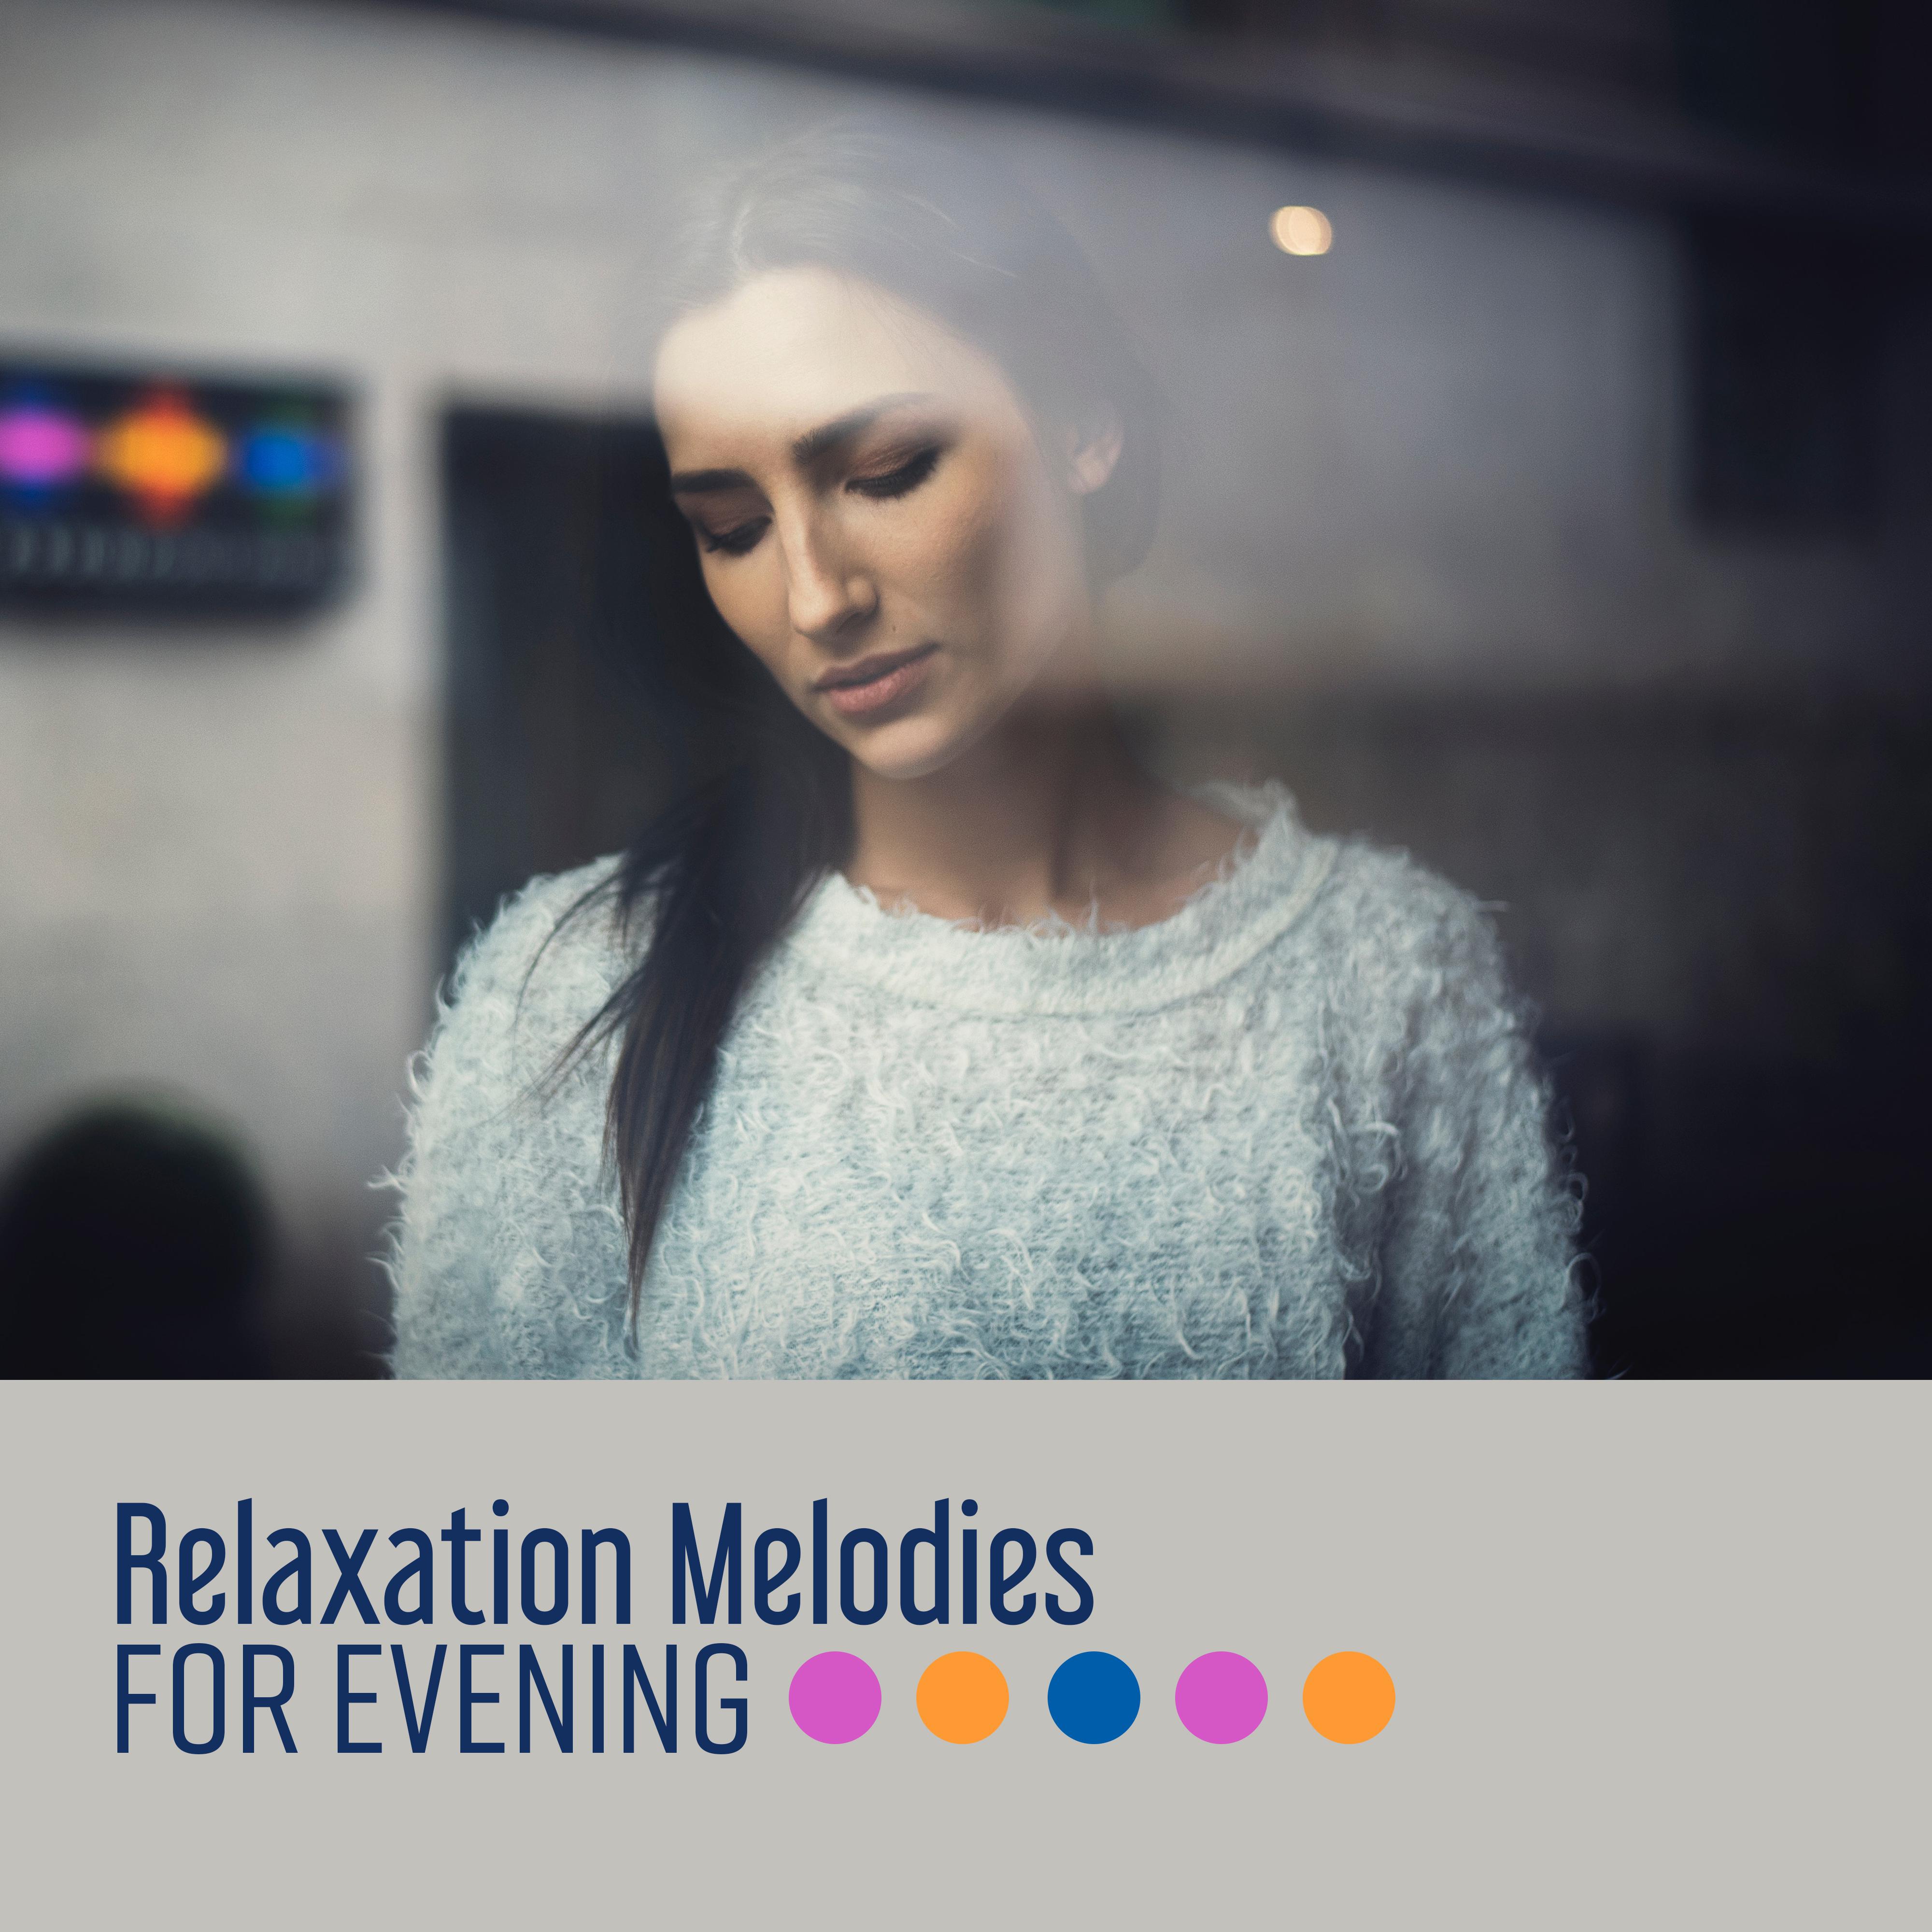 Relaxation Melodies for Evening